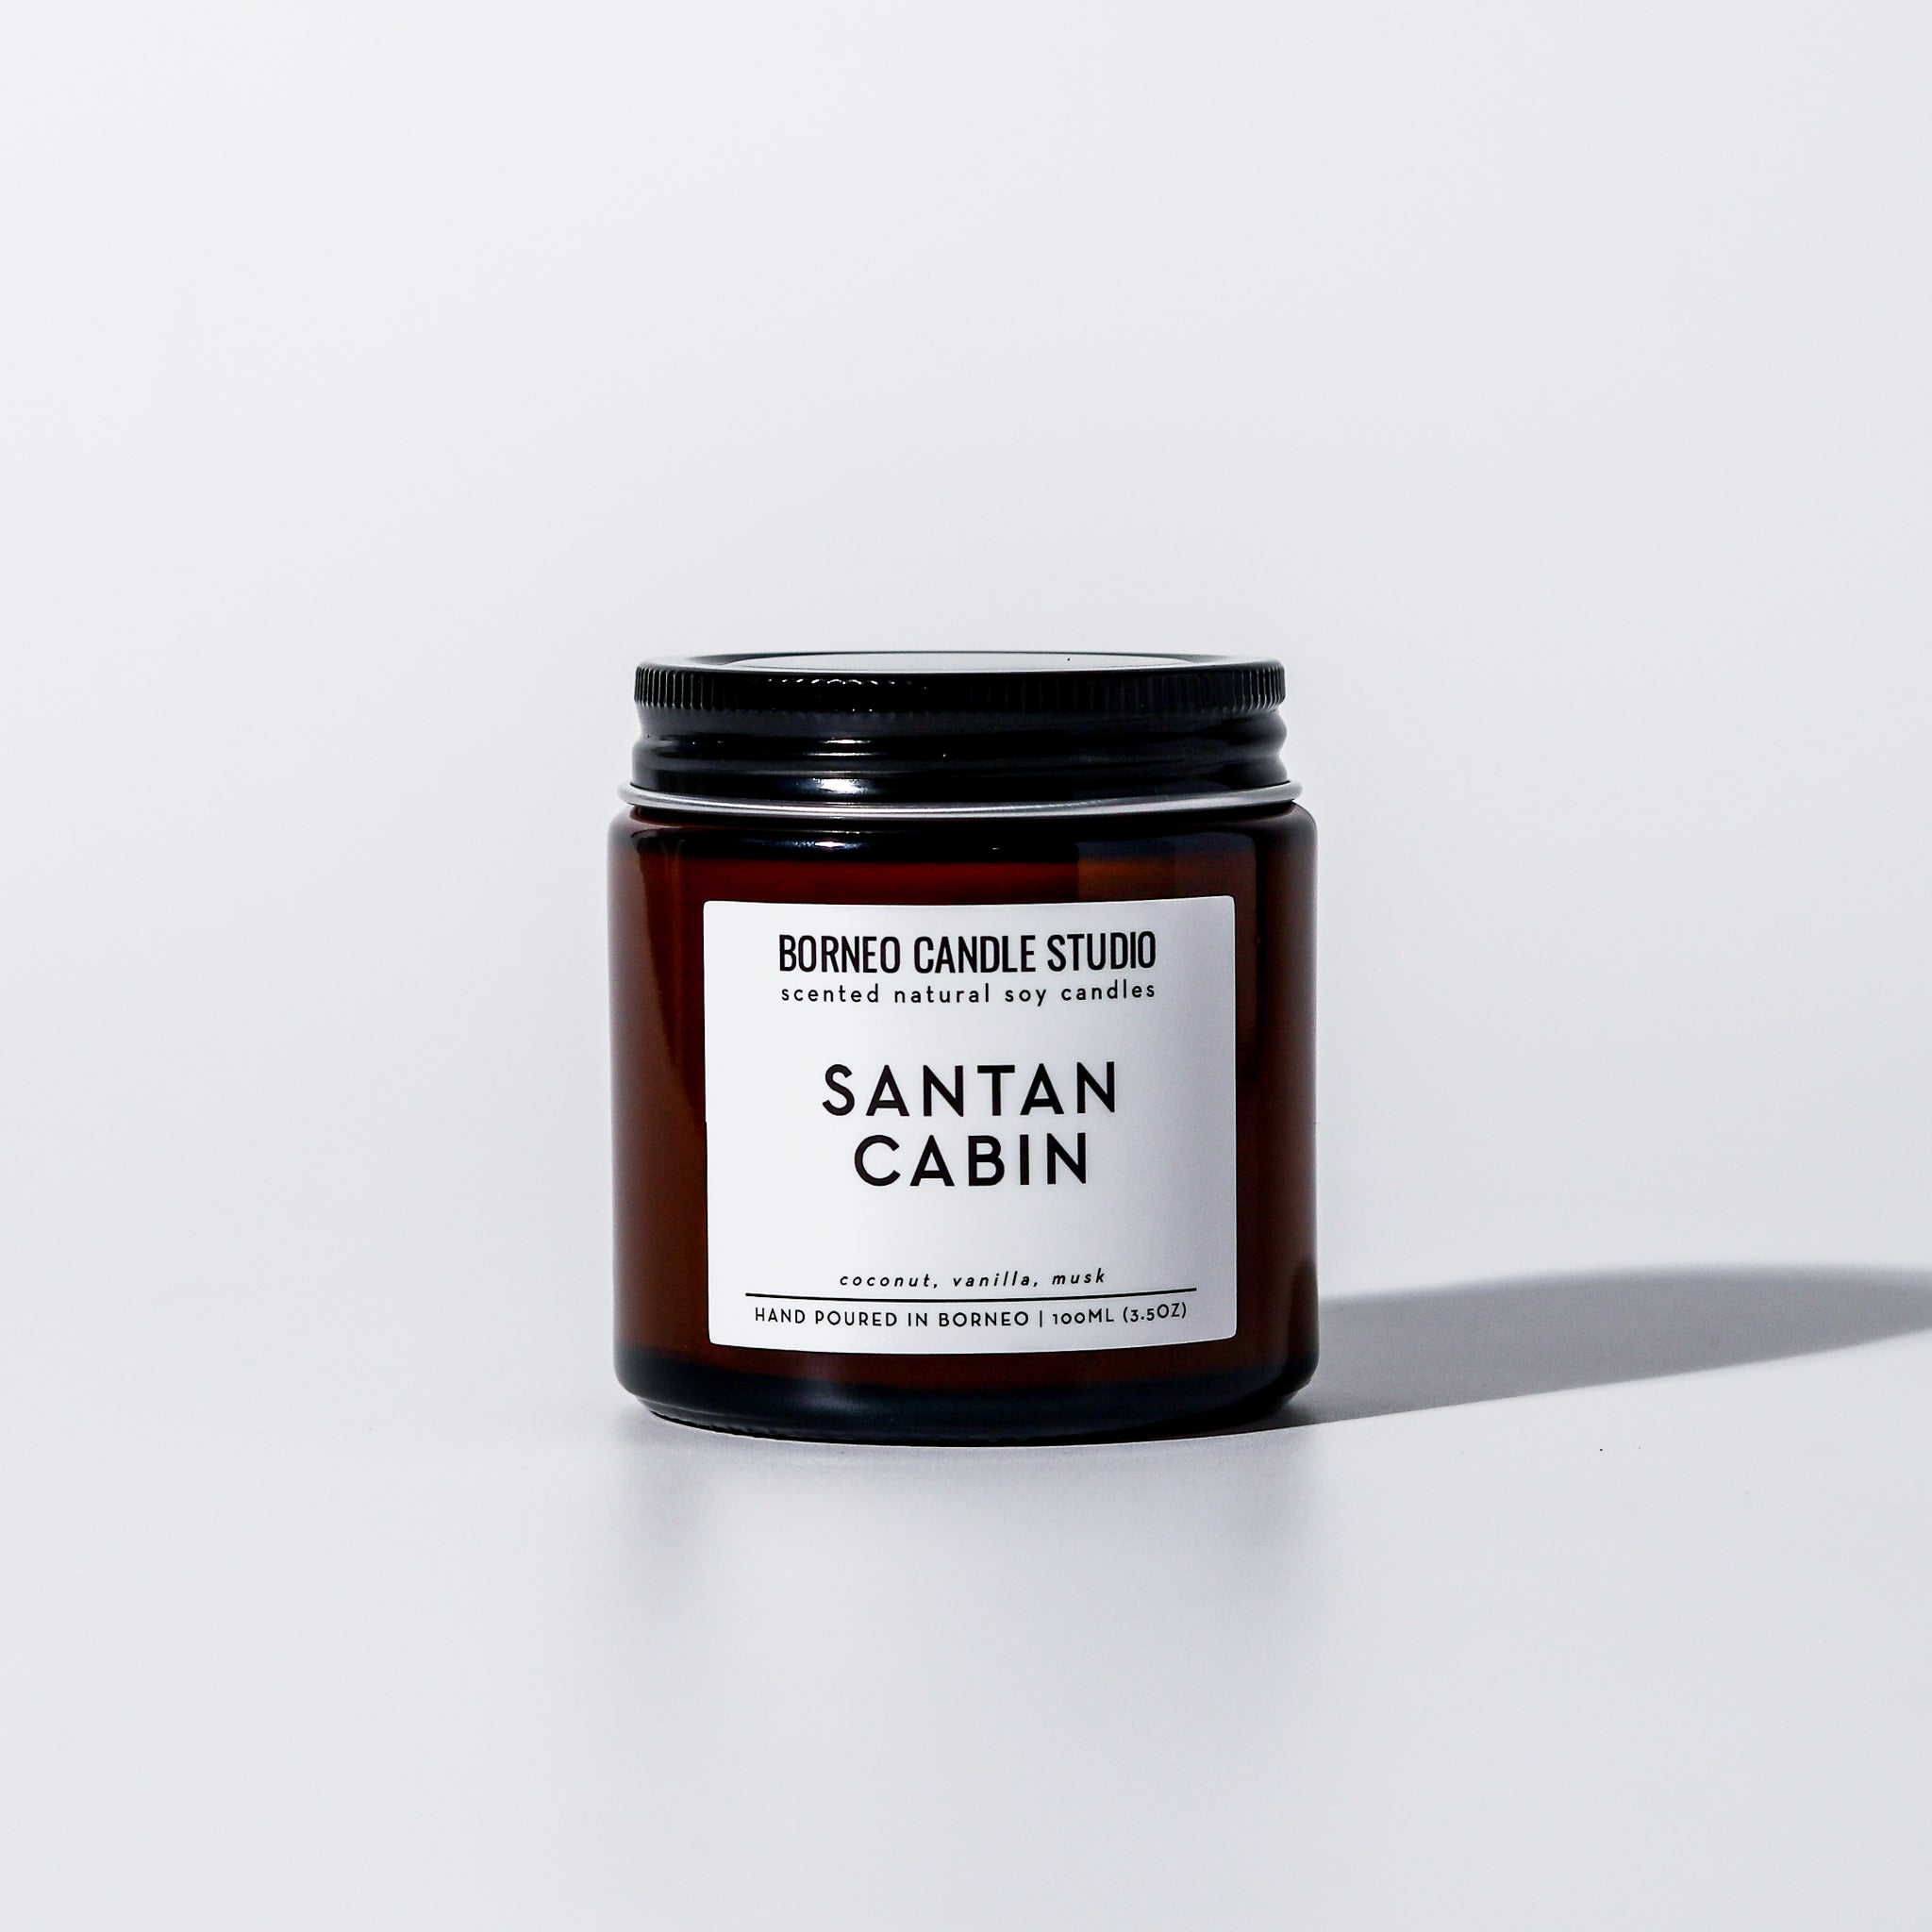 Santan Cabin Scented Candle coconut, vanilla, musk soy candle